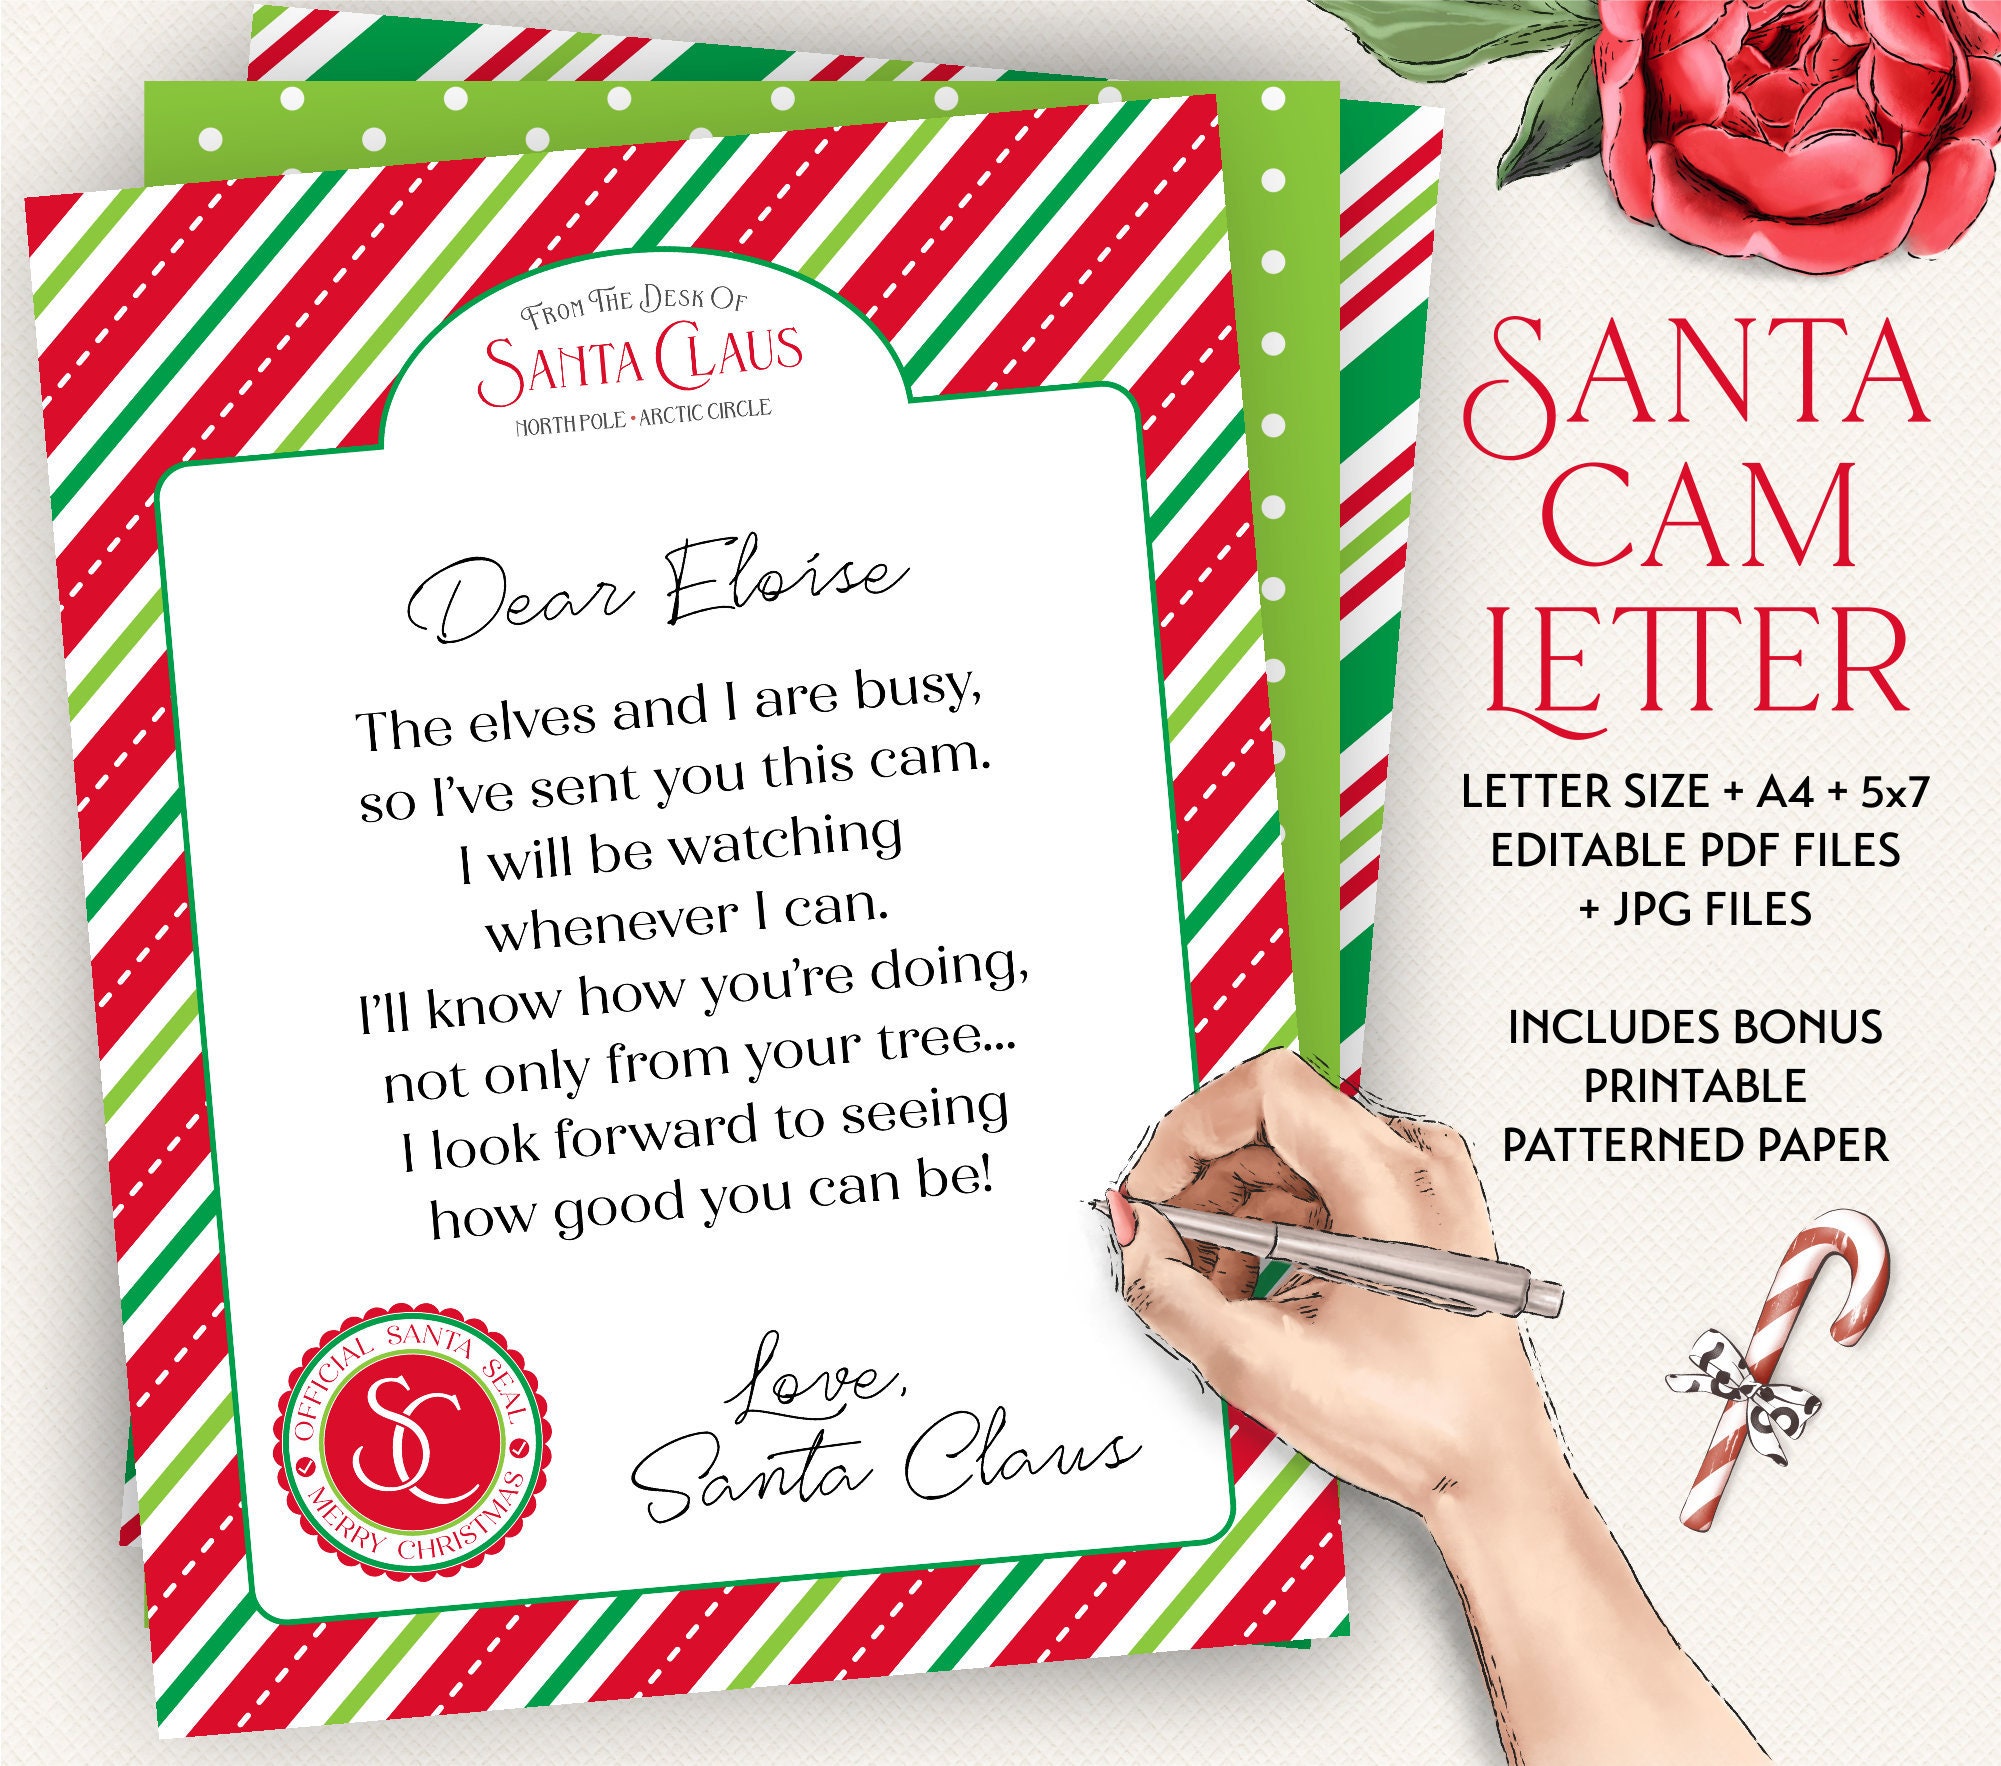 santa-cam-letter-editable-and-printable-sizes-a4-letter-size-5x7